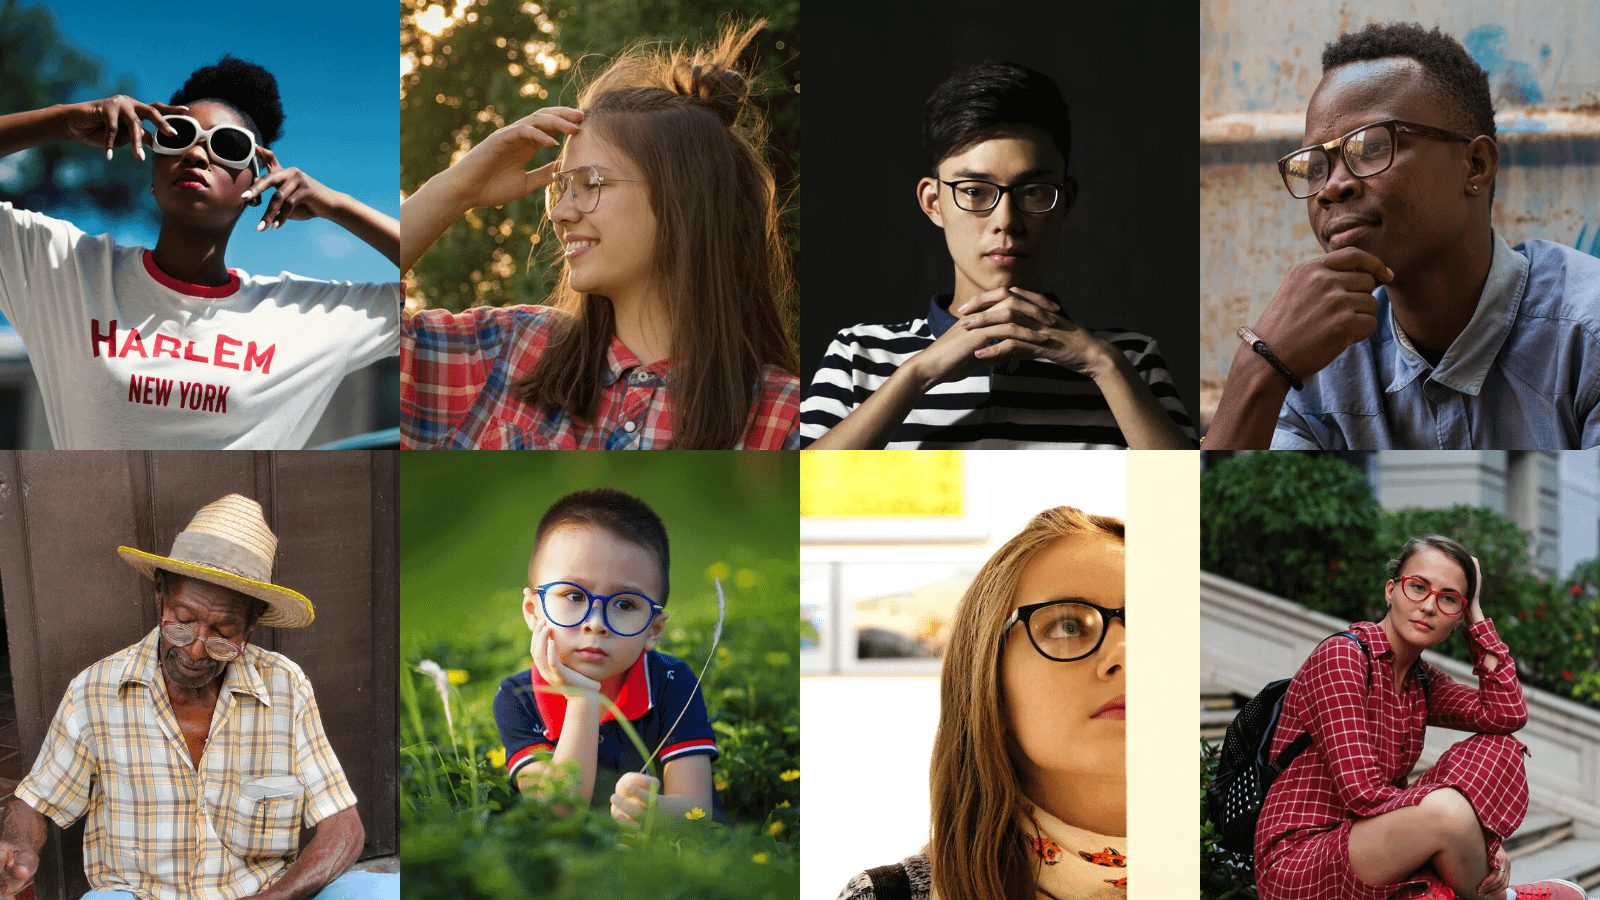 Image: People wearing different kinds of glasses